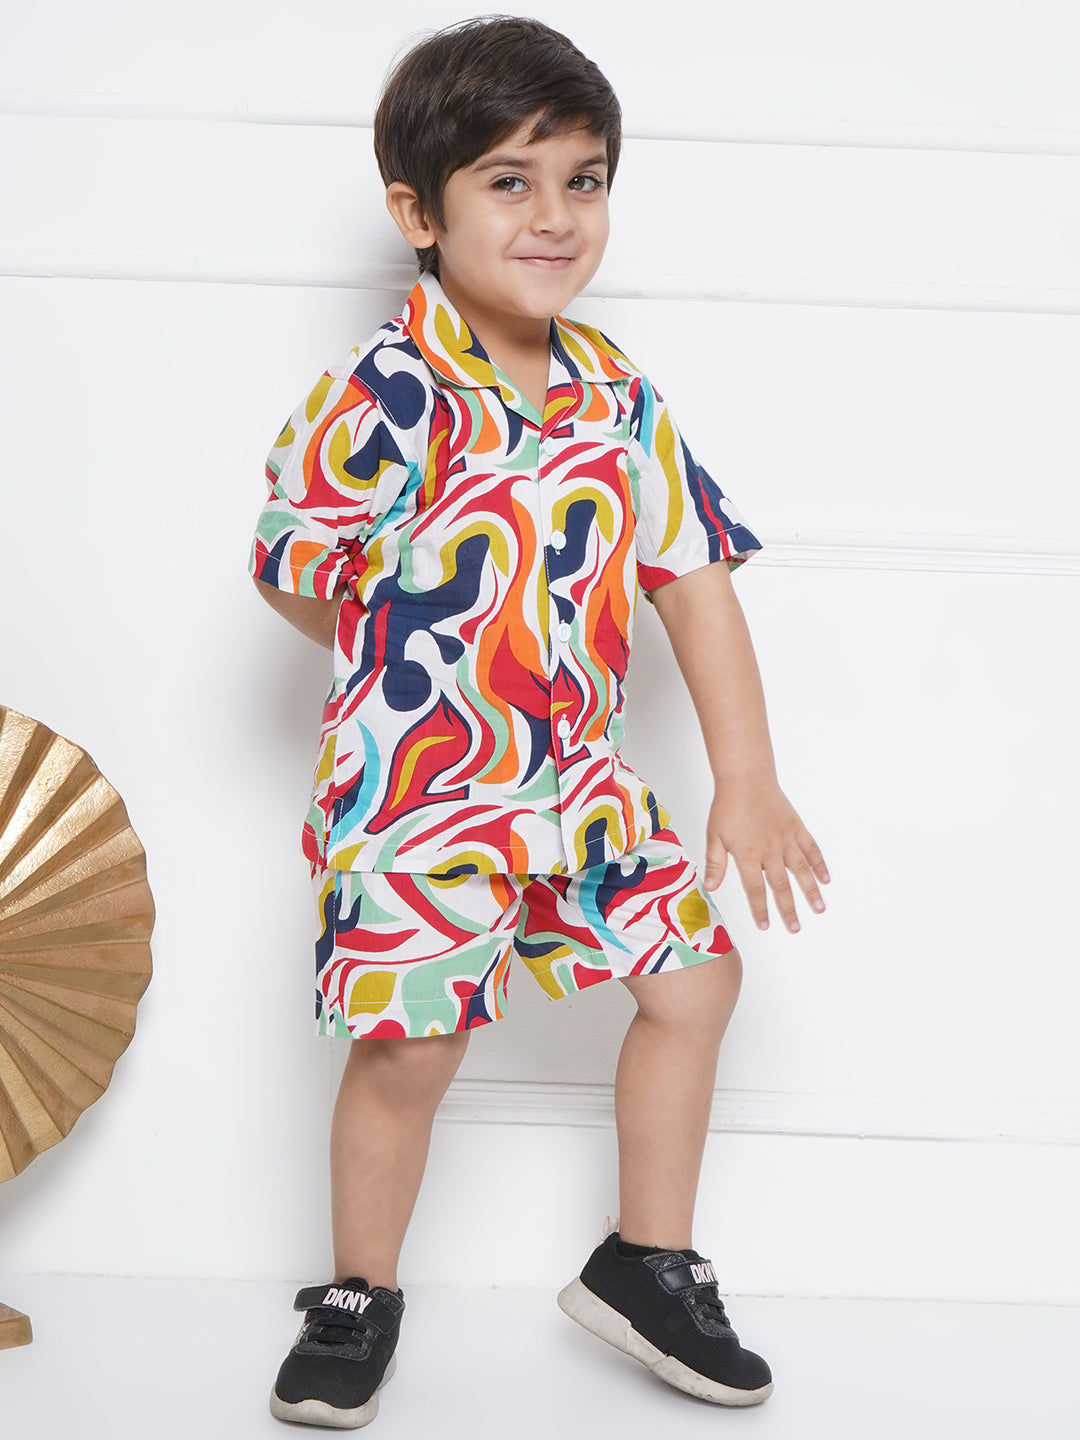 Blue Cotton Shirt & shorts Half Sleeves with Collar and CO-ORDS Set for Boys